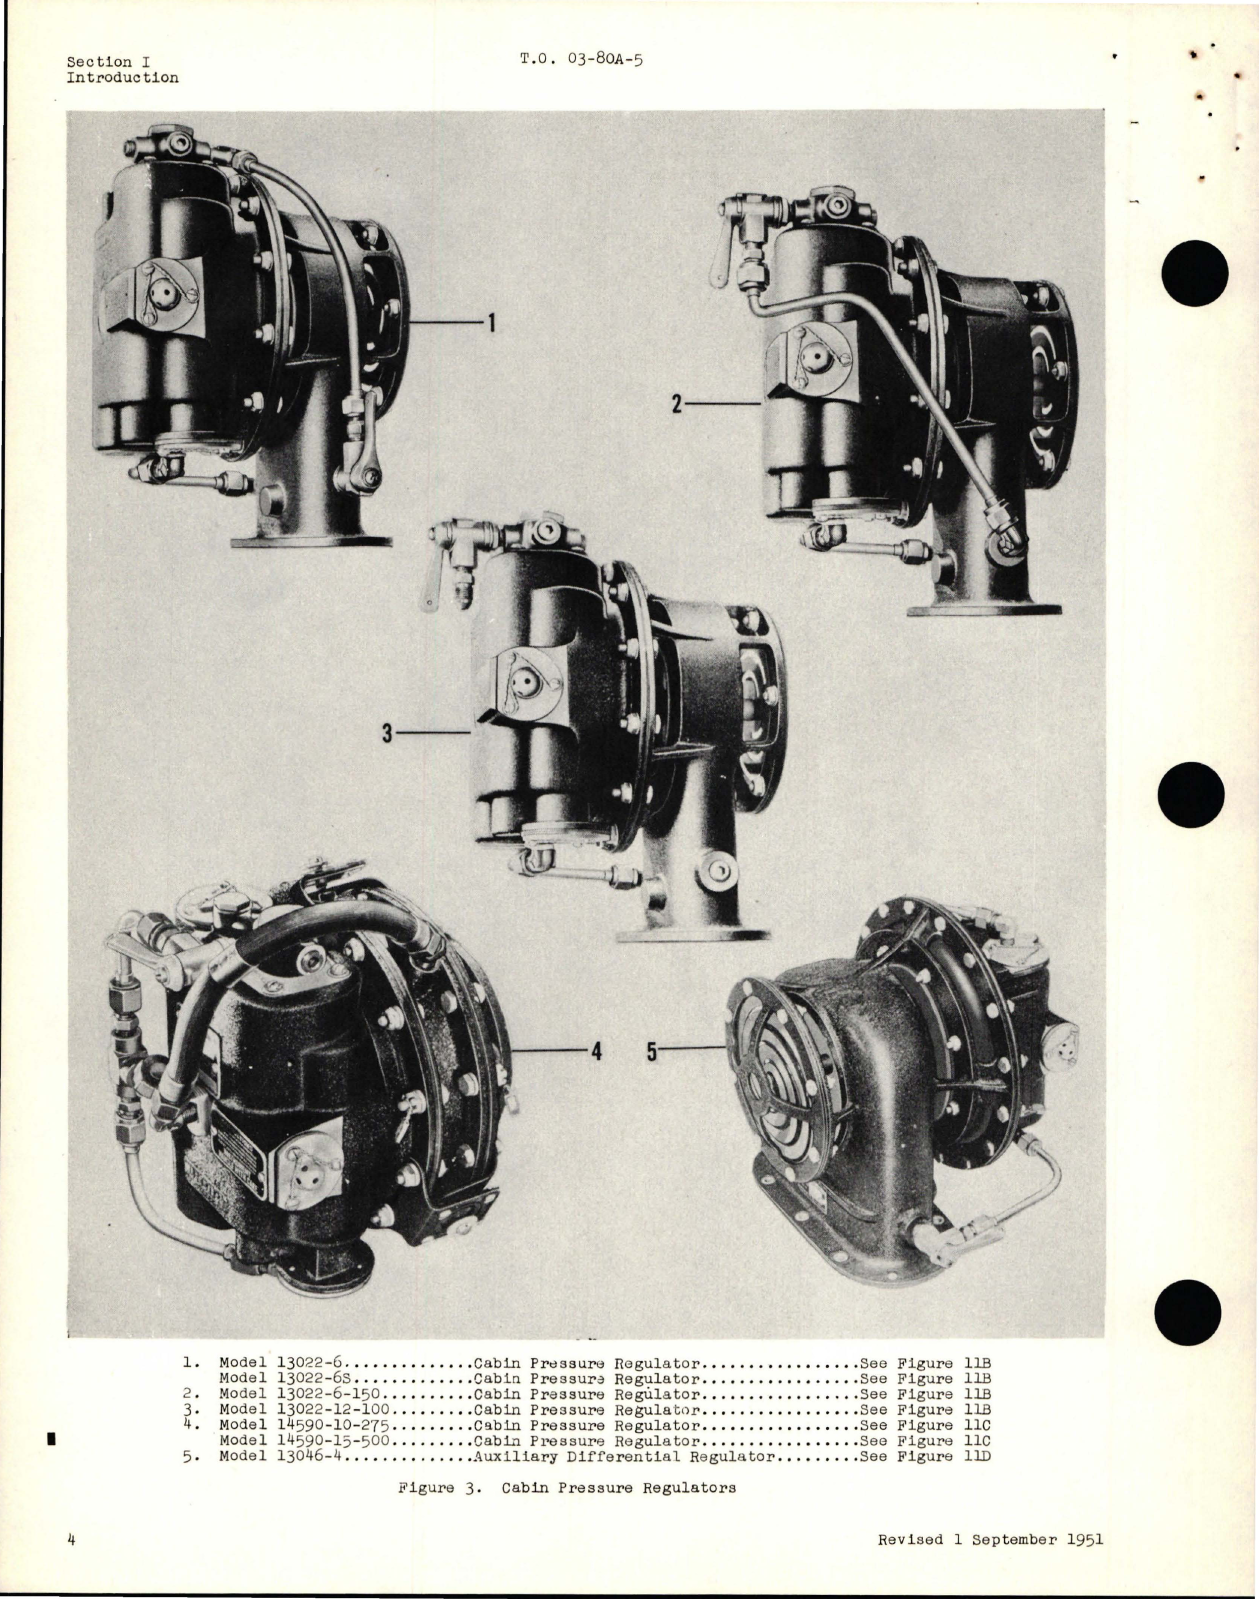 Sample page 8 from AirCorps Library document: Parts Catalog for Cabin Pressure Regulators